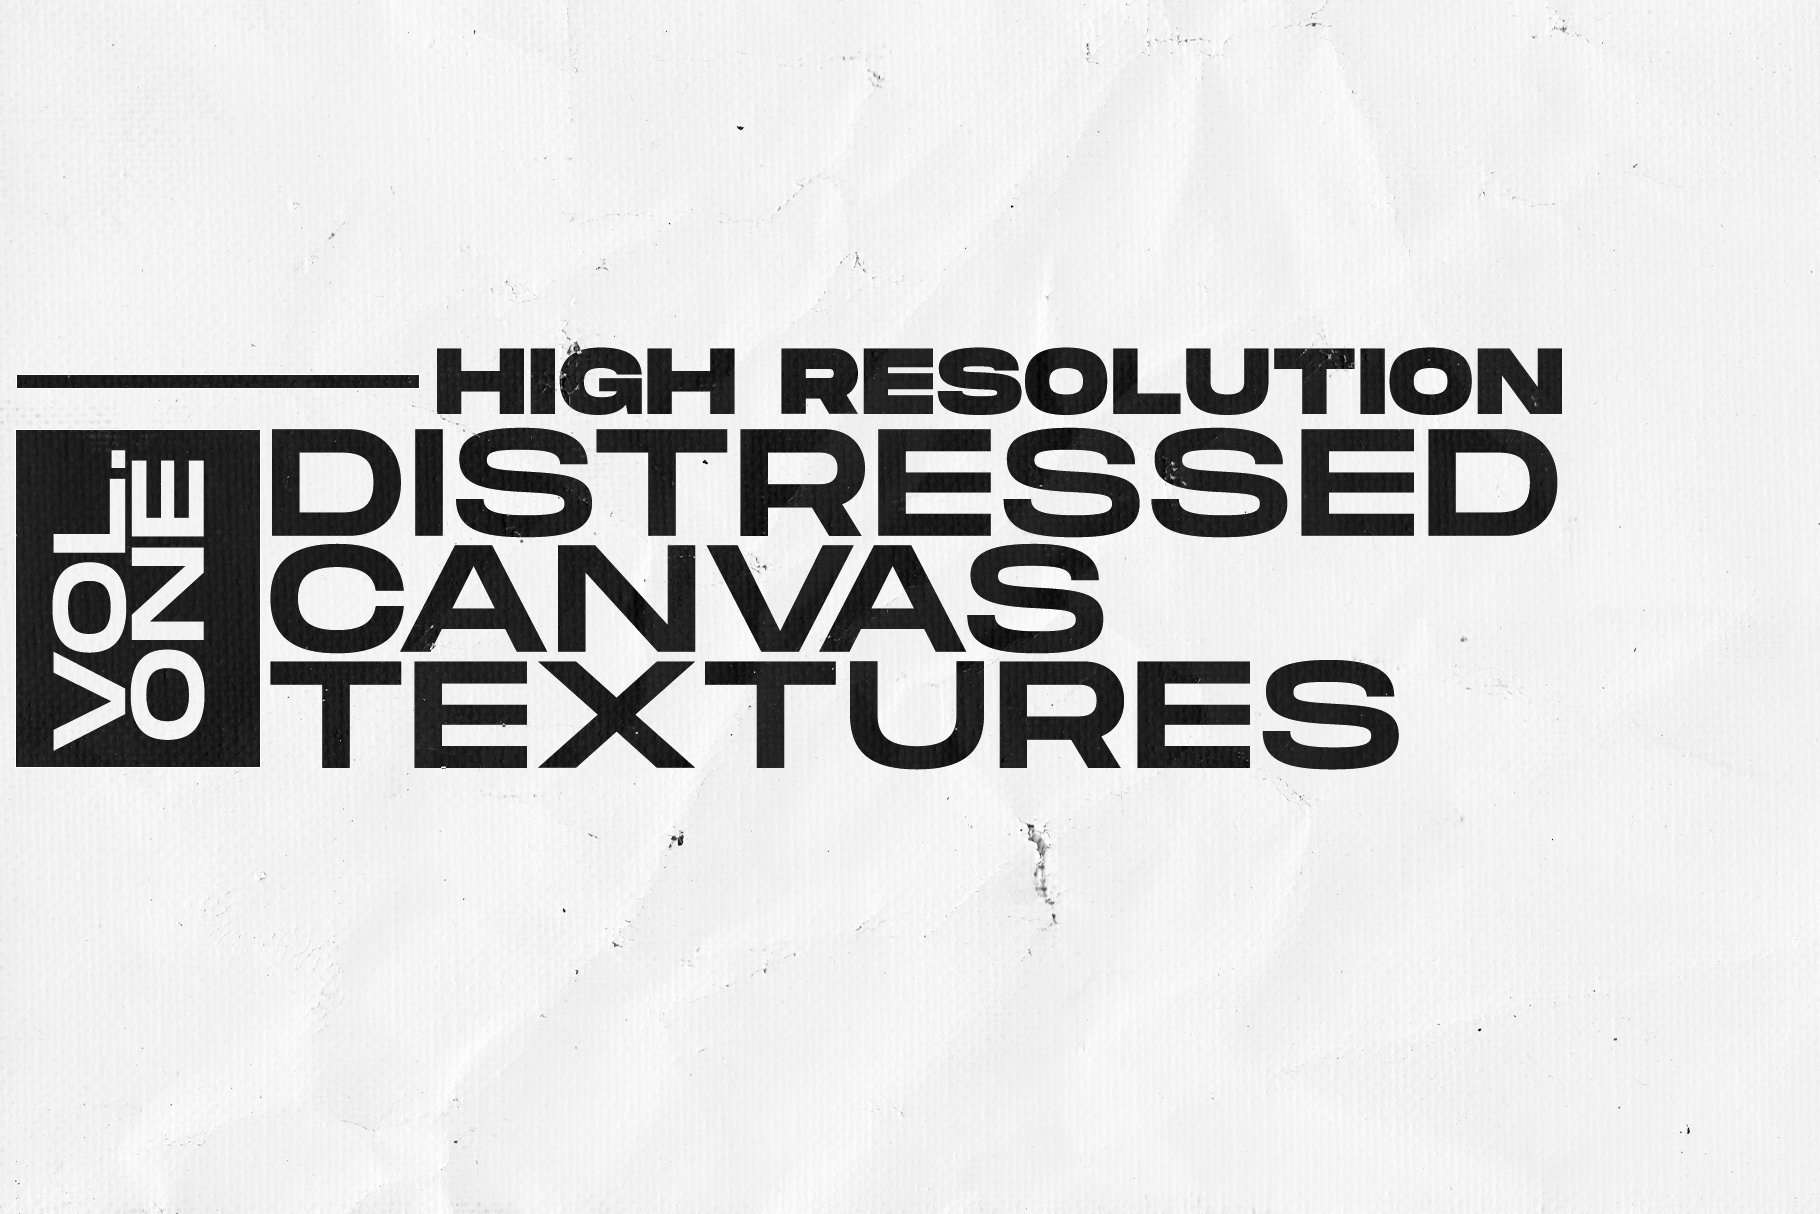 High-Res Distressed Canvas Textures cover image.